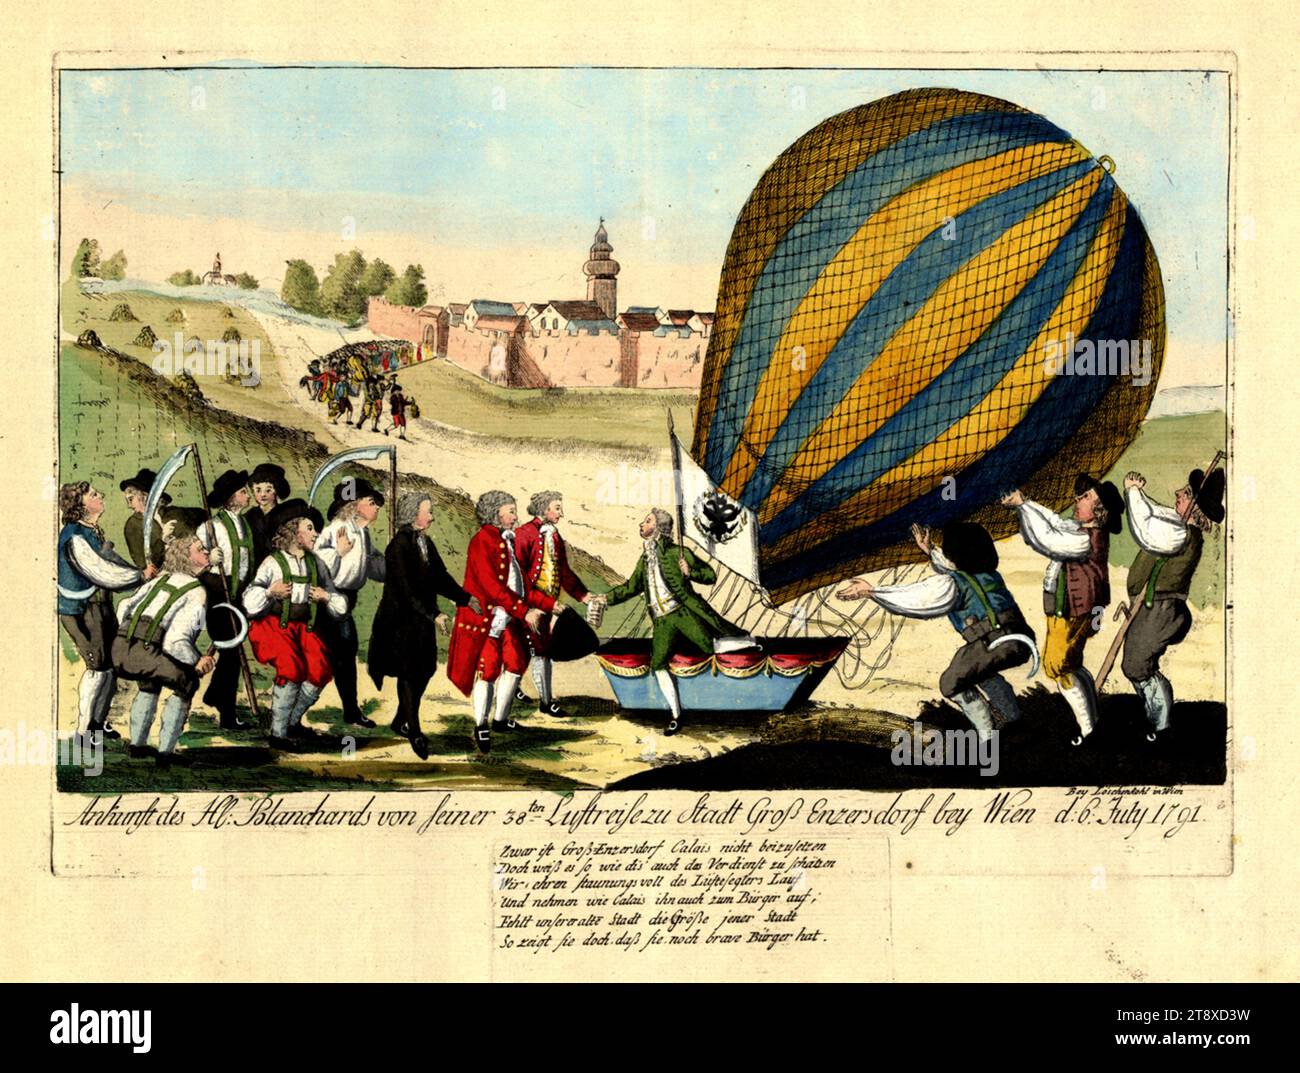 Arrival of St. Blanchard from his 38th air journey to the city of Groß Enzersdorf bey Wien d 6. July 1791', Johann Hieronymus Löschenkohl (1753-1807), publishing house, 1791, paper, colorised, copperplate engraving, plate size 23, 8×34 cm, sheet size 39×50 cm, Fine Arts, aviation, The Vienna Collection Stock Photo